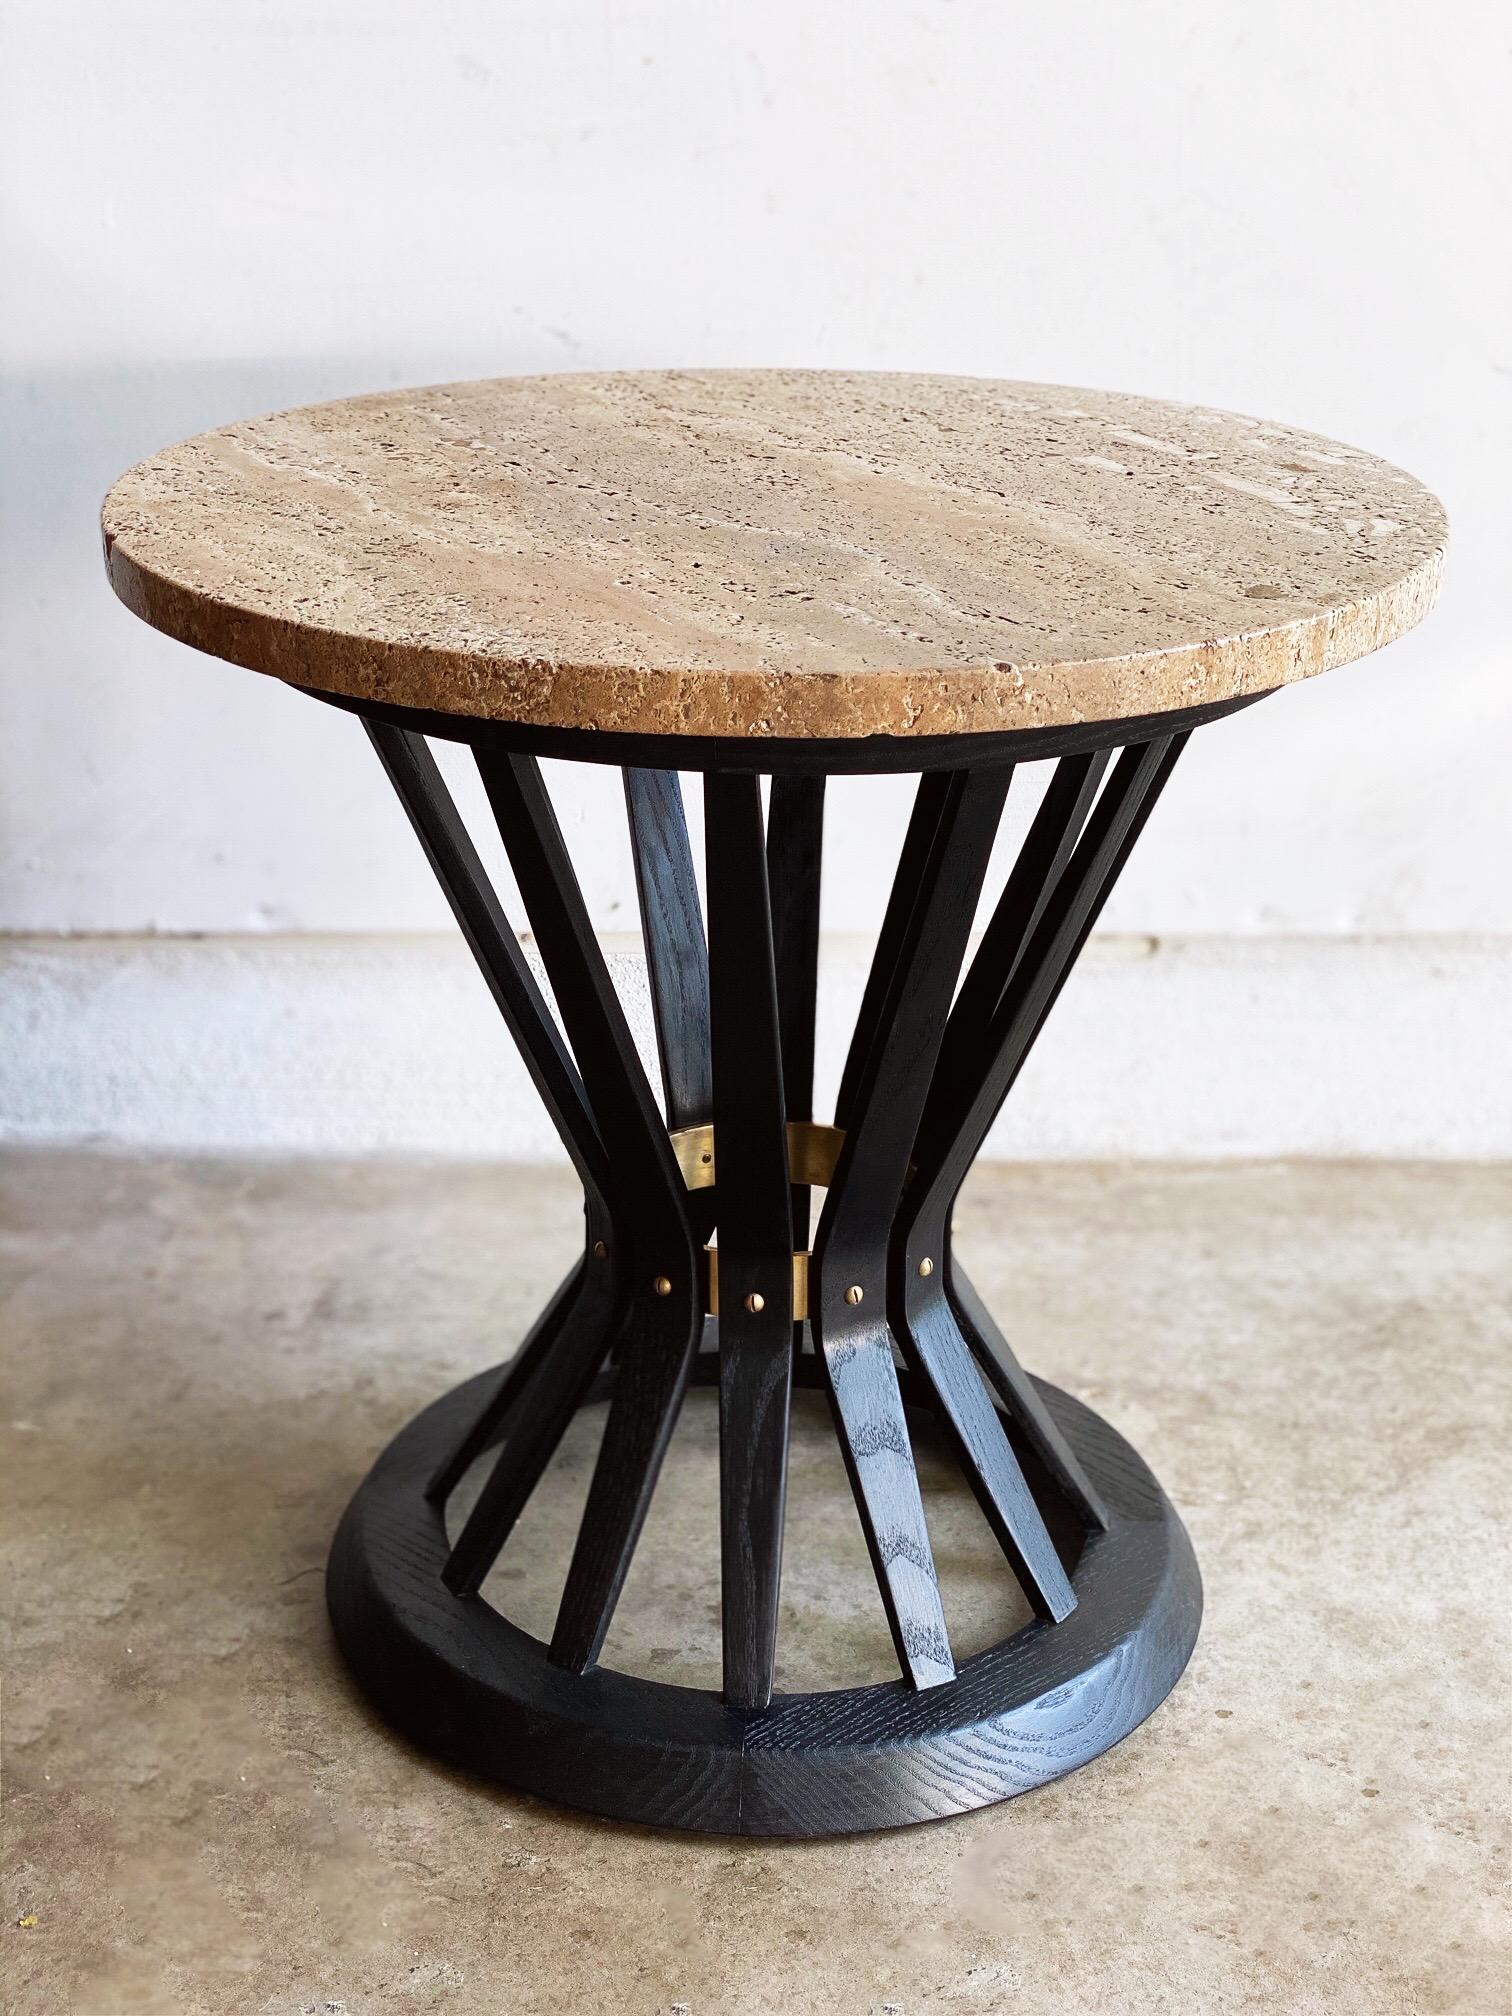 20th Century Pair of Round Travertine Tables by Edward Wormley for Dunbar Furniture Corp.